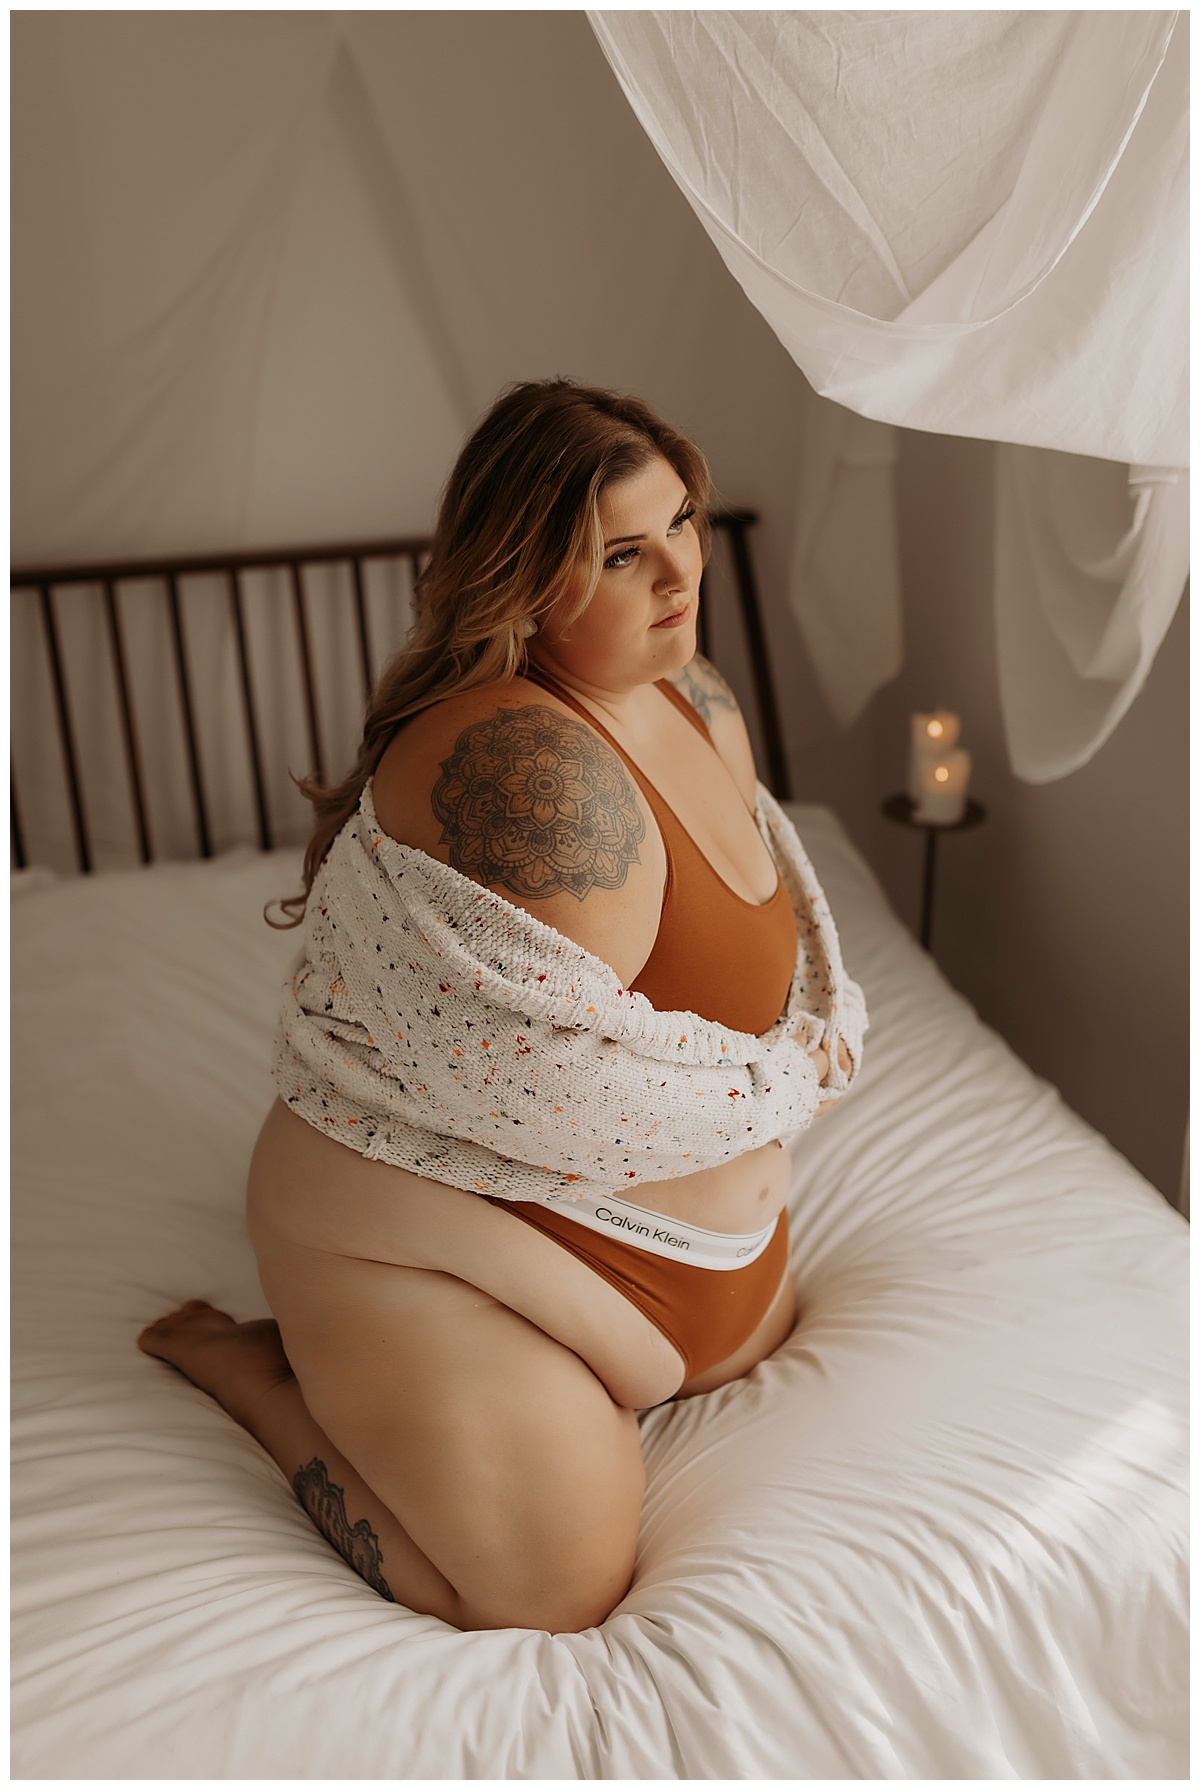 Female sits on the bed wearing lingerie for Minneapolis Boudoir Photographer